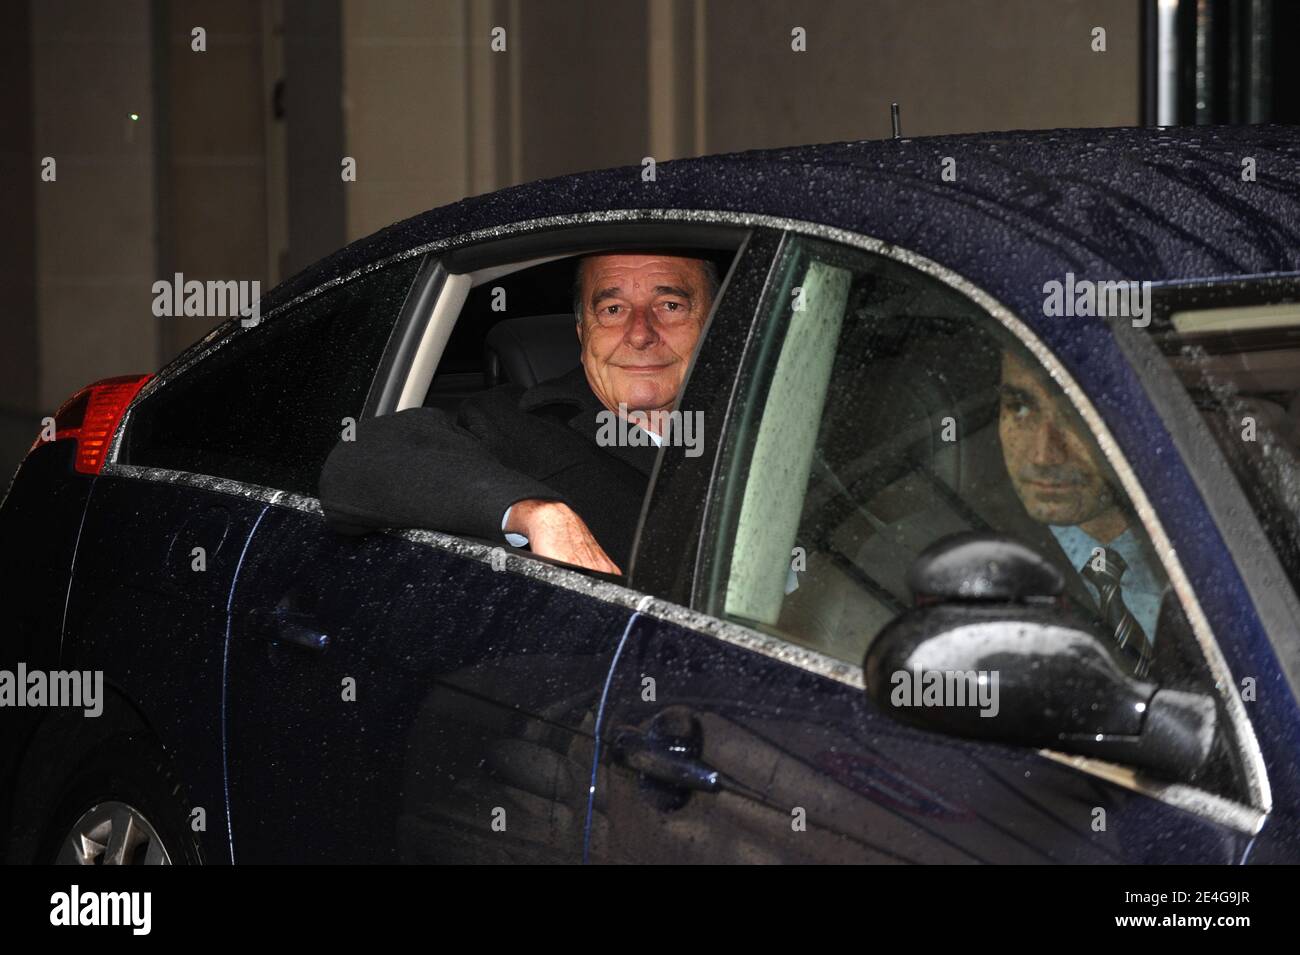 Former French president Jacques Chirac leaves his office in Paris, France, on November 3, 2009. Jacques Chirac will be the first former French president to be tried for corruption, officials said, after charges from his years as mayor of Paris returned to taint the twilight of his long career. Jacques Chirac stands accused of giving political allies lucrative bogus jobs as city hall 'ghost workers' and his trial will be the latest in a series to expose graft and dirty tricks at the highest levels of state. Photo by Mousse/ABACAPRESS.COM Stock Photo